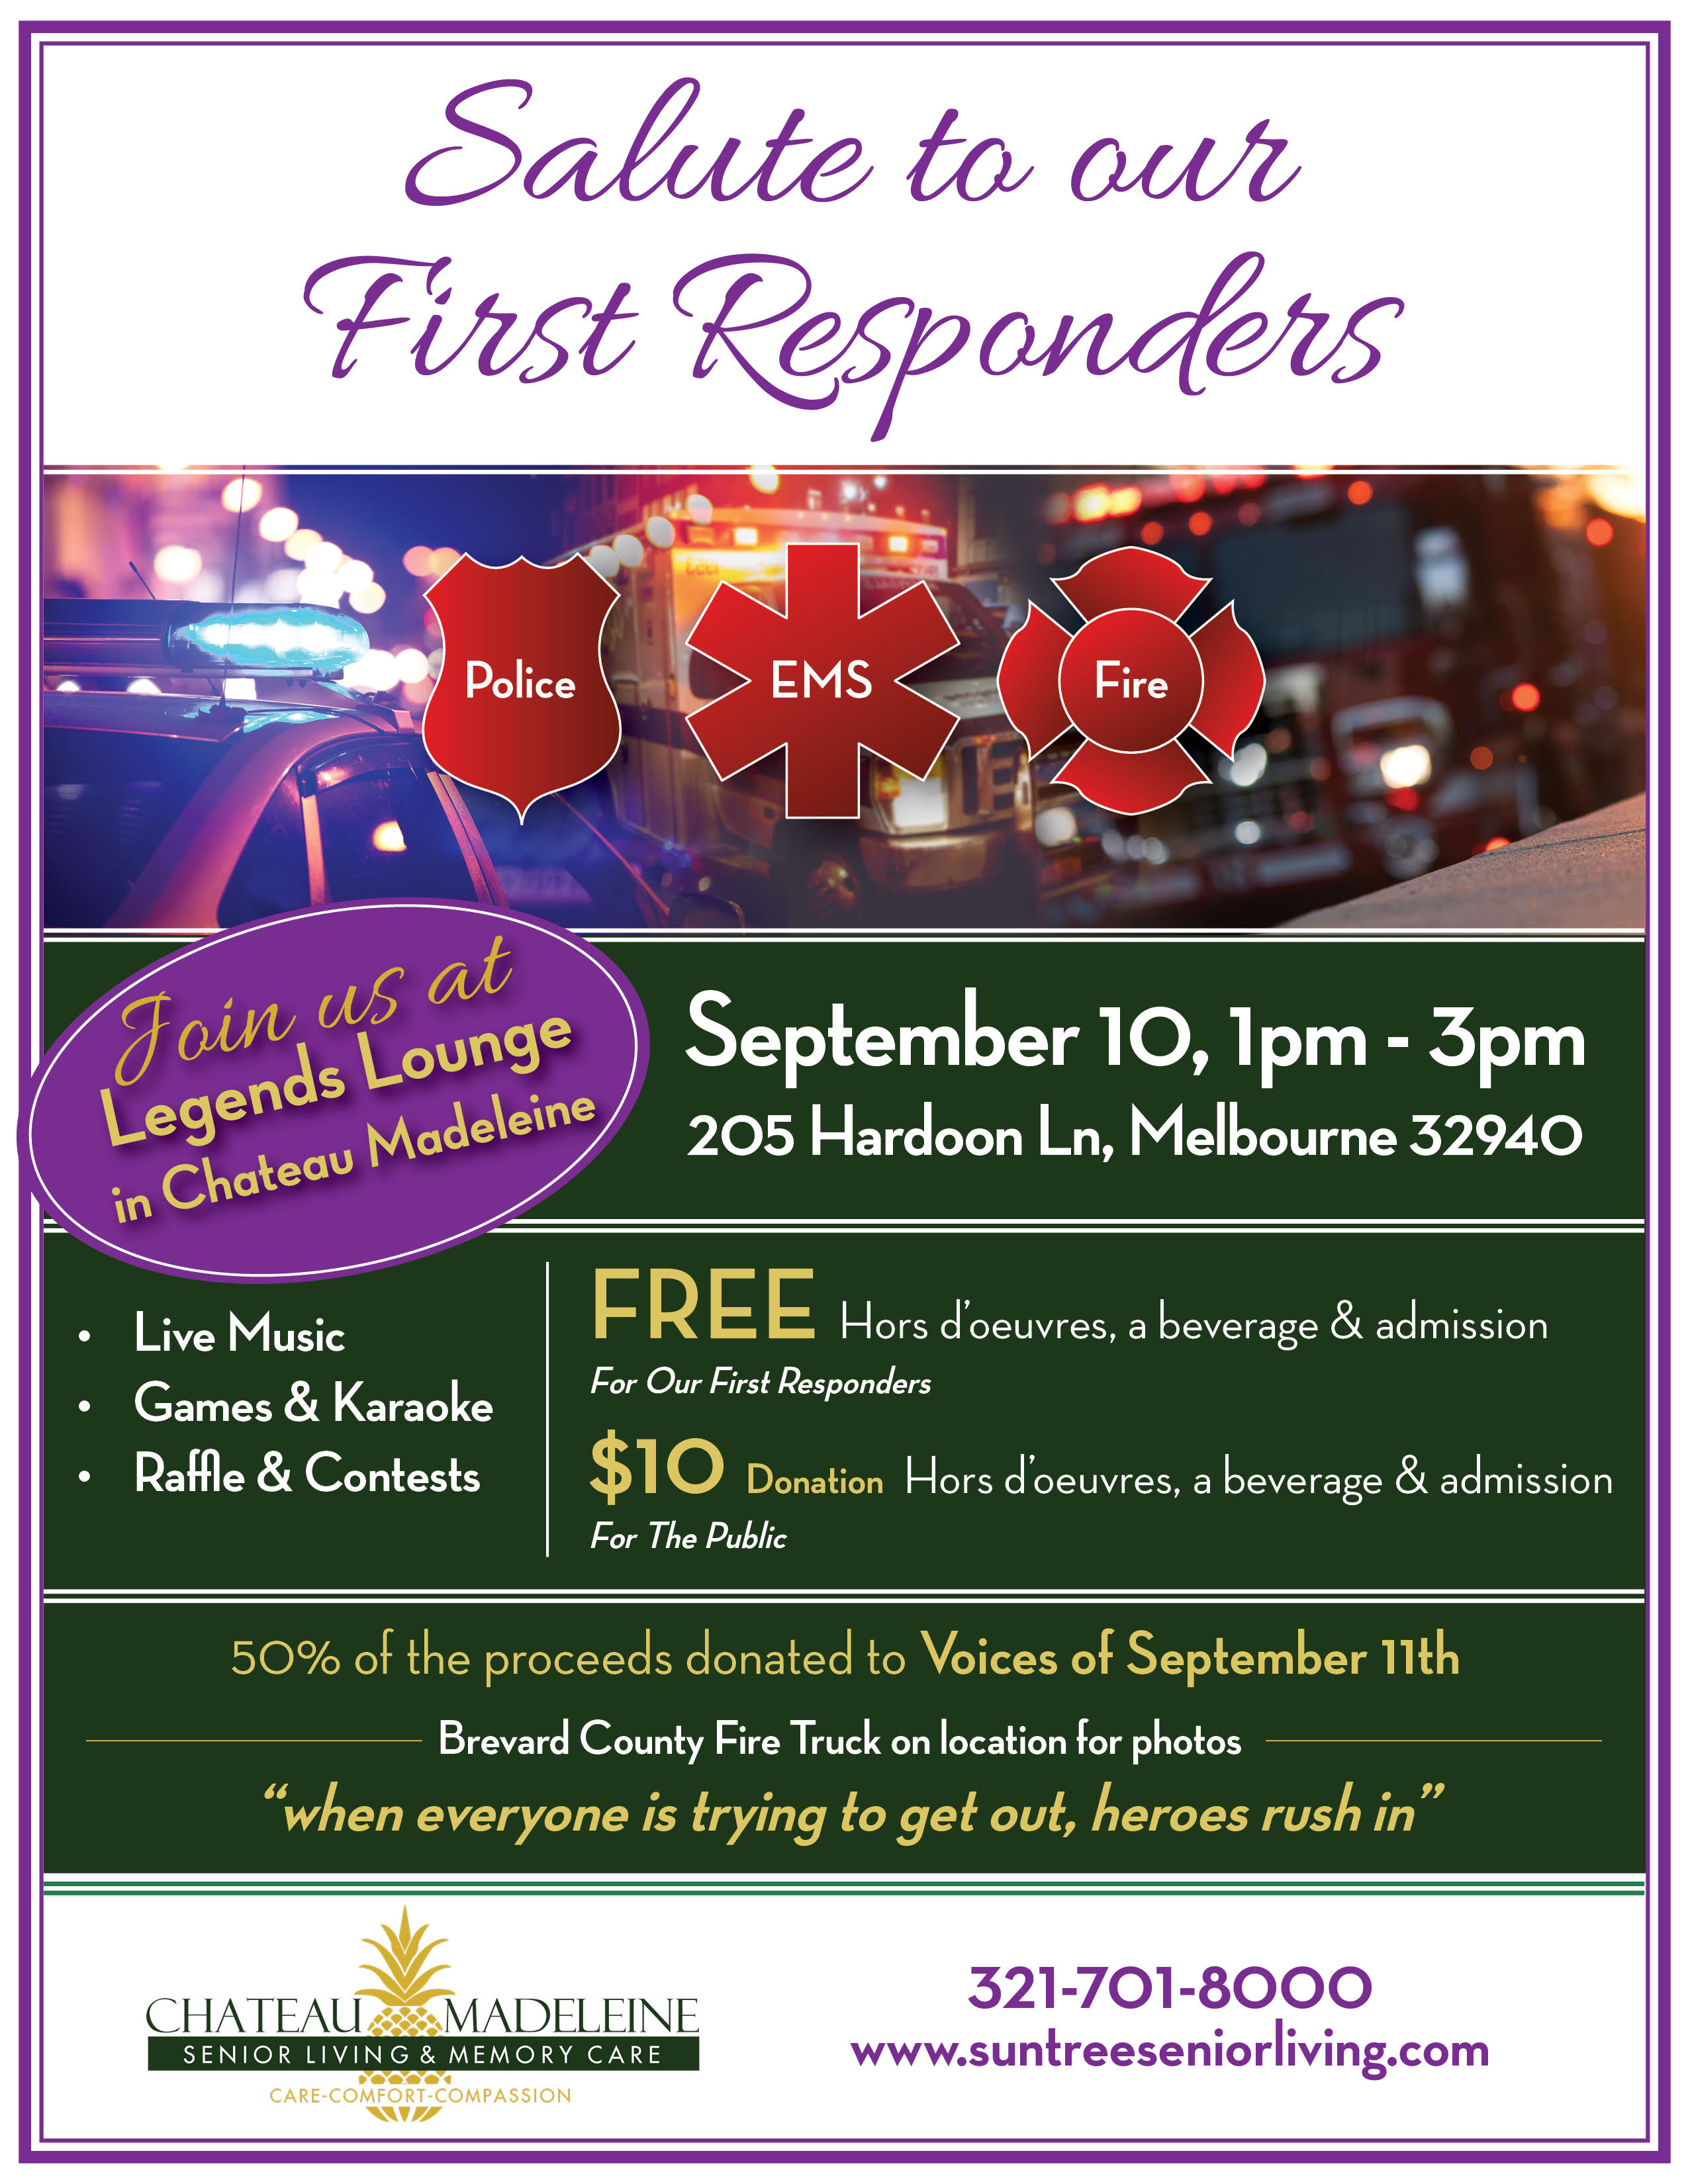 Salute to our First Responders Fundraiser at Chateau Madeleine